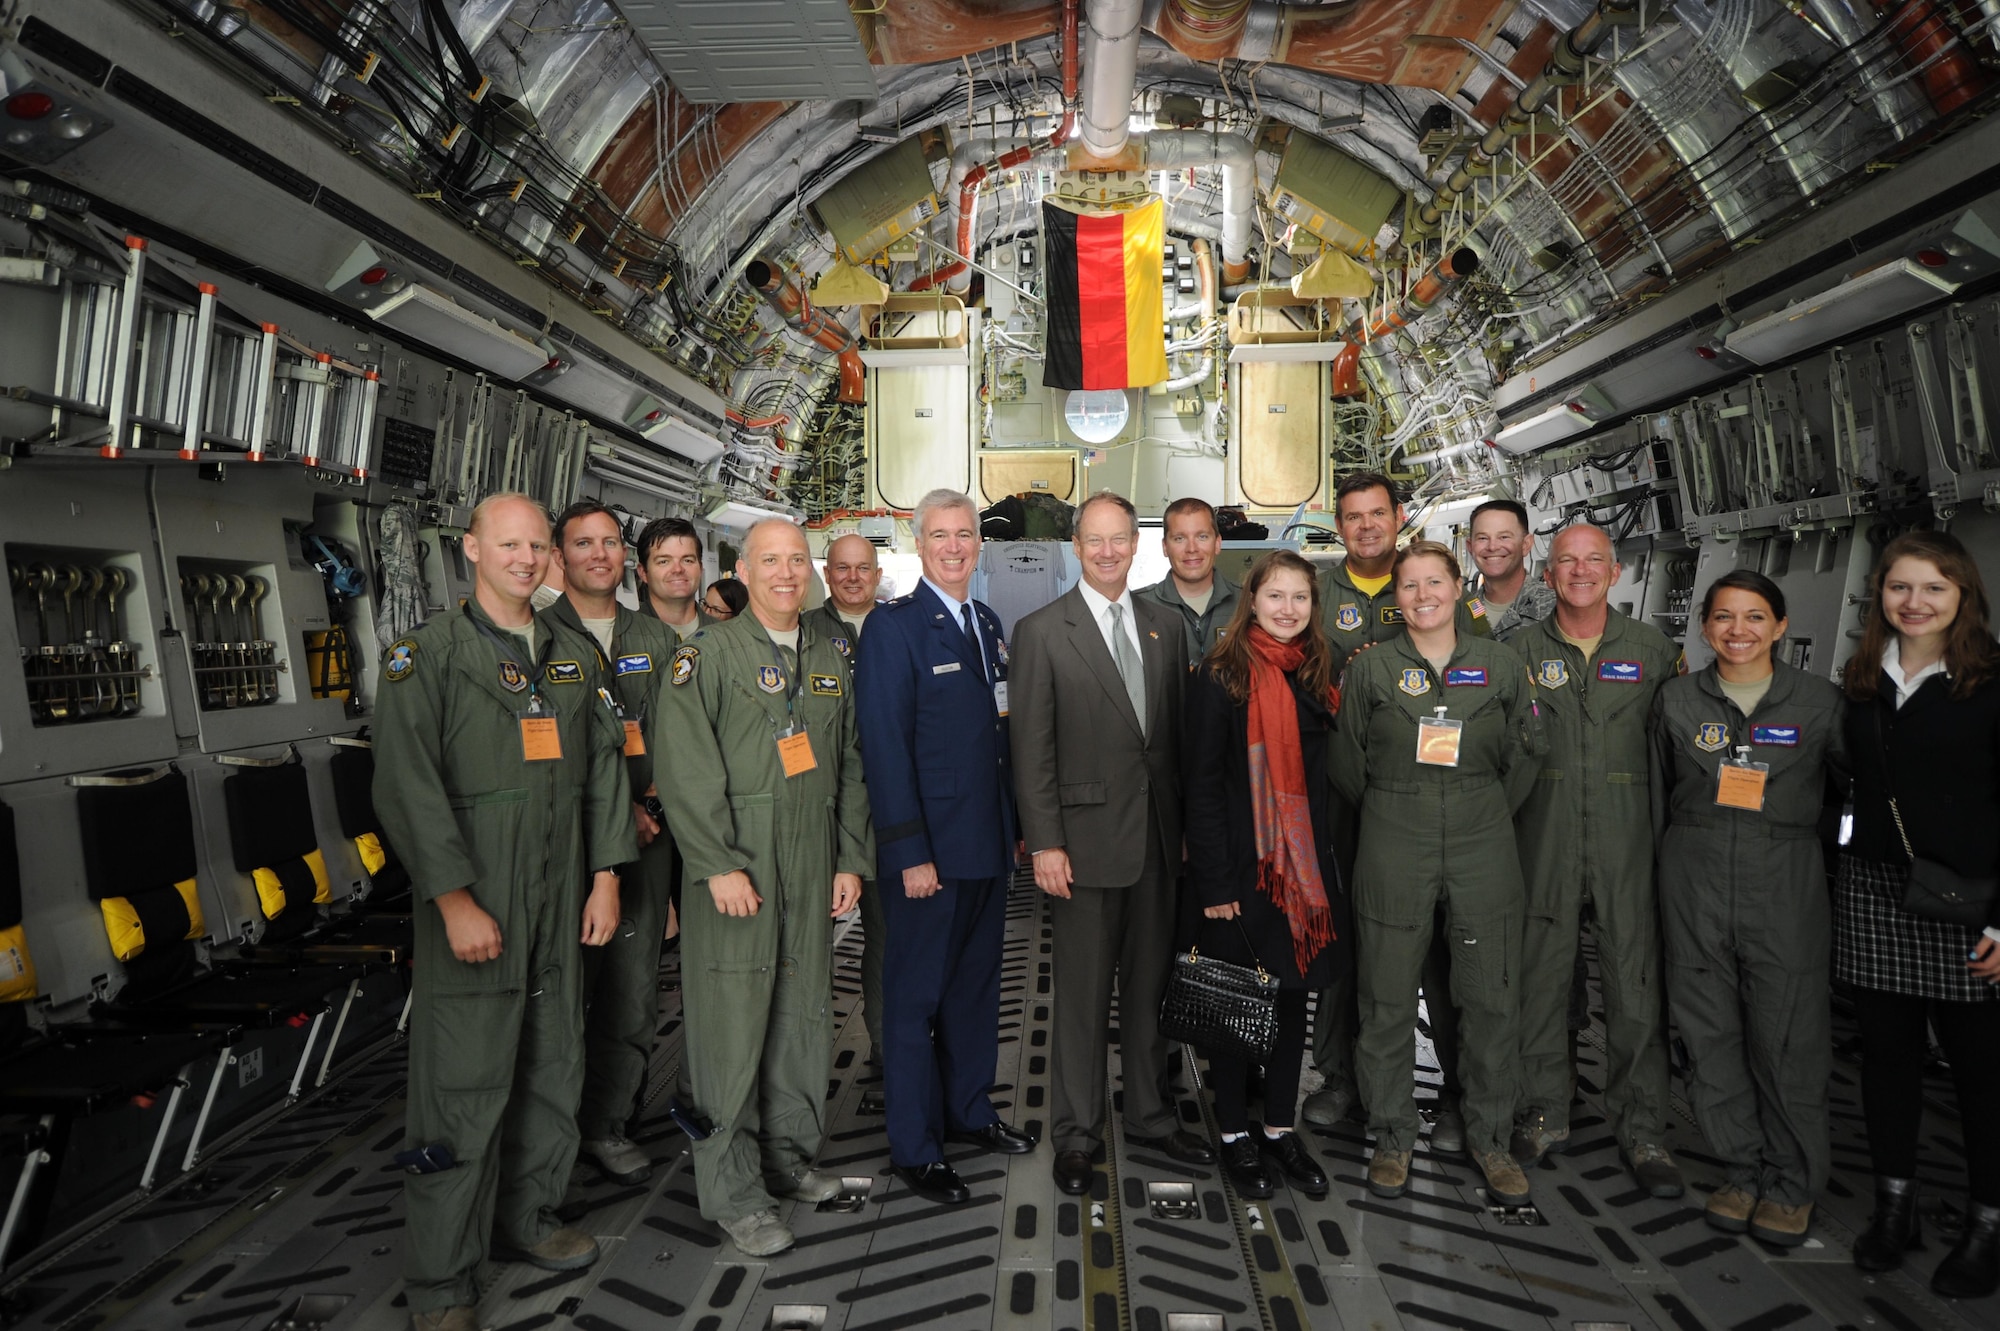 (Center) John B. Emerson, United States Ambassador to Germany, along with Brig. Gen. “Randy” Huston, mobilization assistant to the vice commander, Third Air Force and 17th Expeditionary Air Force, Ramstein Air Base, Germany, and the ambassador’s daughters are welcomed abroad the C-17 Globemaster III entitled “The Spirit of Berlin” June 1, 2016, during the 2016 Berlin Air Show. Emerson was confirmed by the United States Senate on Aug.1, 2013 as U.S. Ambassador to the Federal Republic of Germany and presented his credentials to German President Joachim Gauck on Aug. 26, 2013.  (U.S. Air Force photo by Senior Airman Tom Brading)